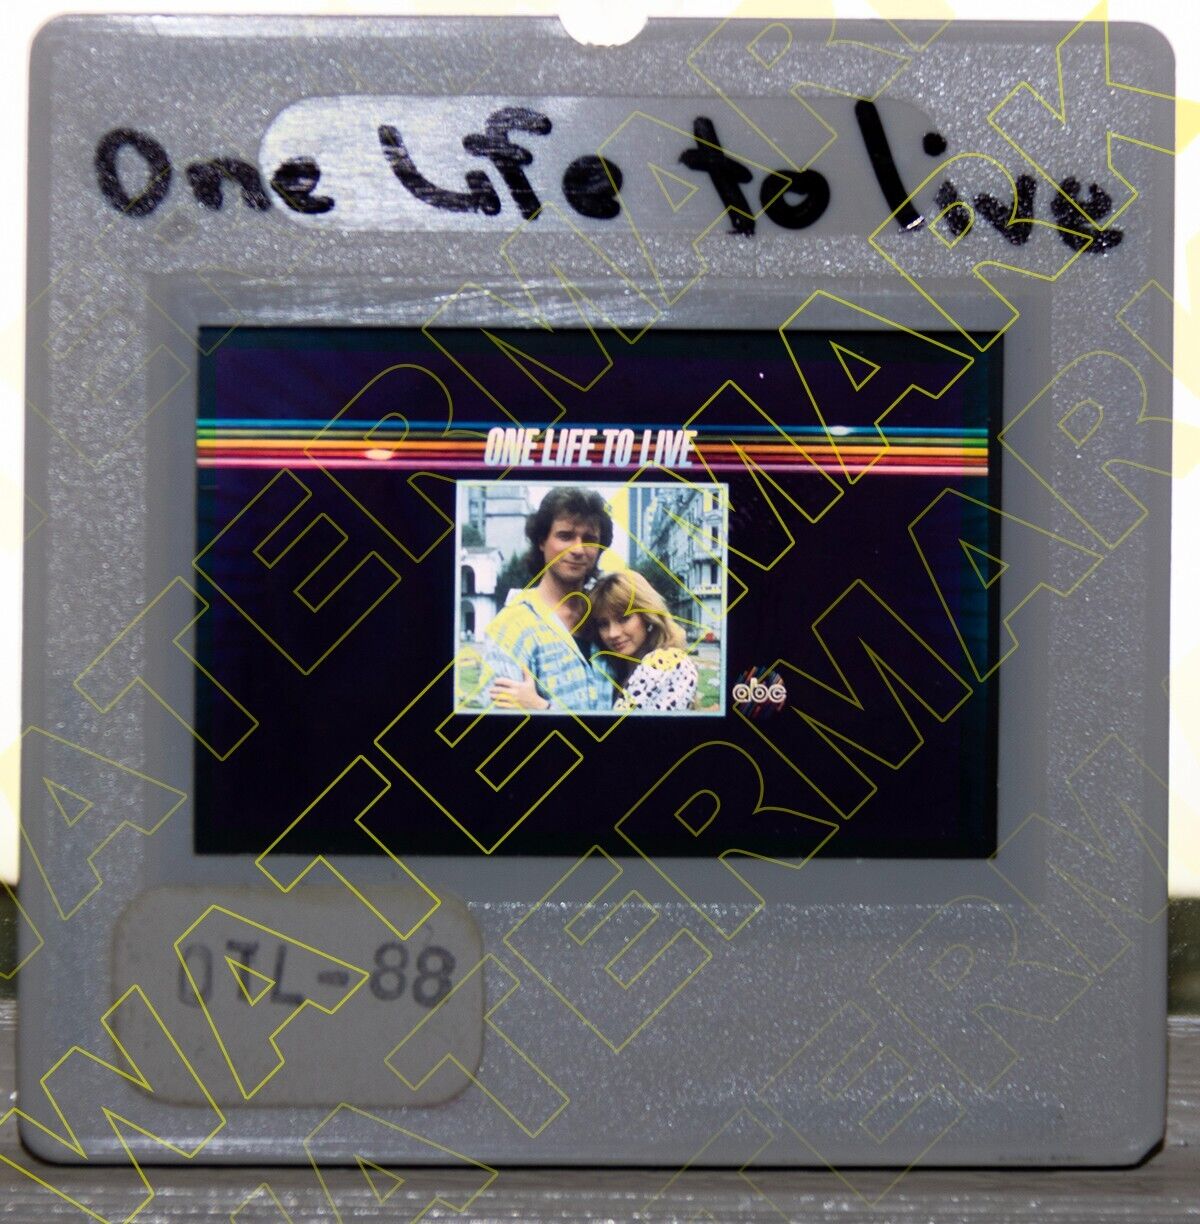 One Life to Live James DePaiva Andrea Evans Cord Tina transparency 35mm slide